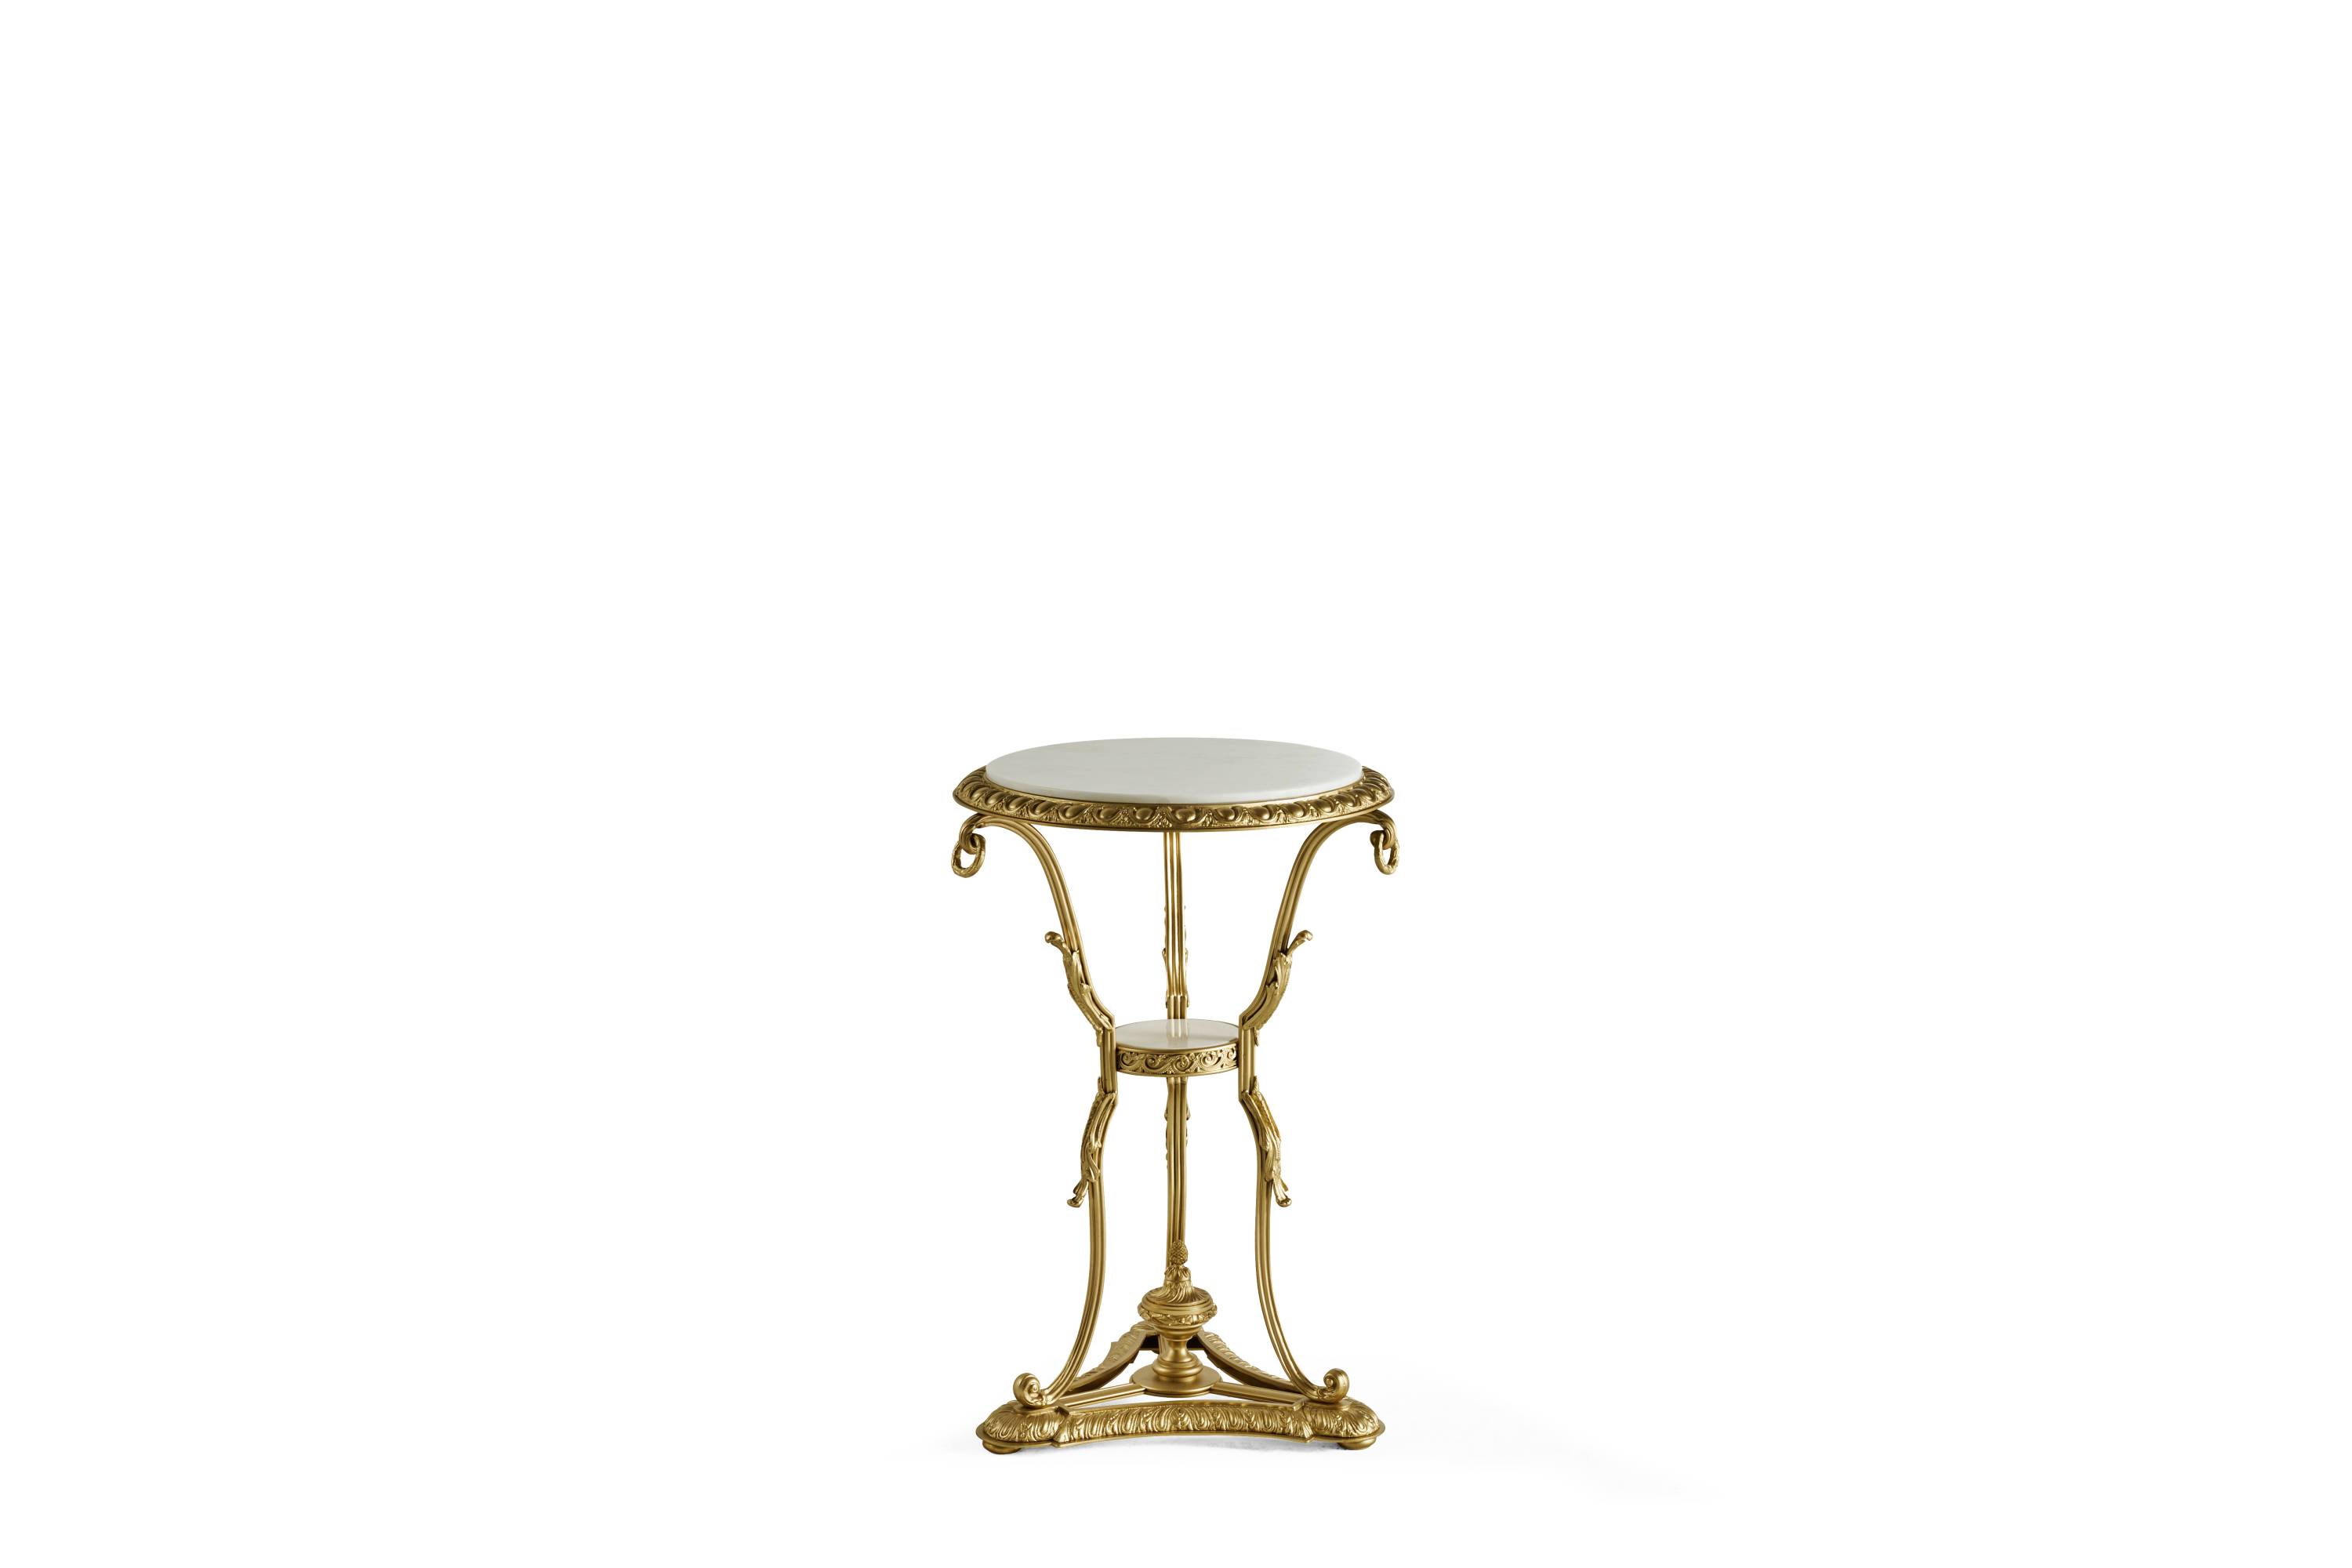 BIJOUX low table - Bespoke projects with luxury Made in Italy classic furniture